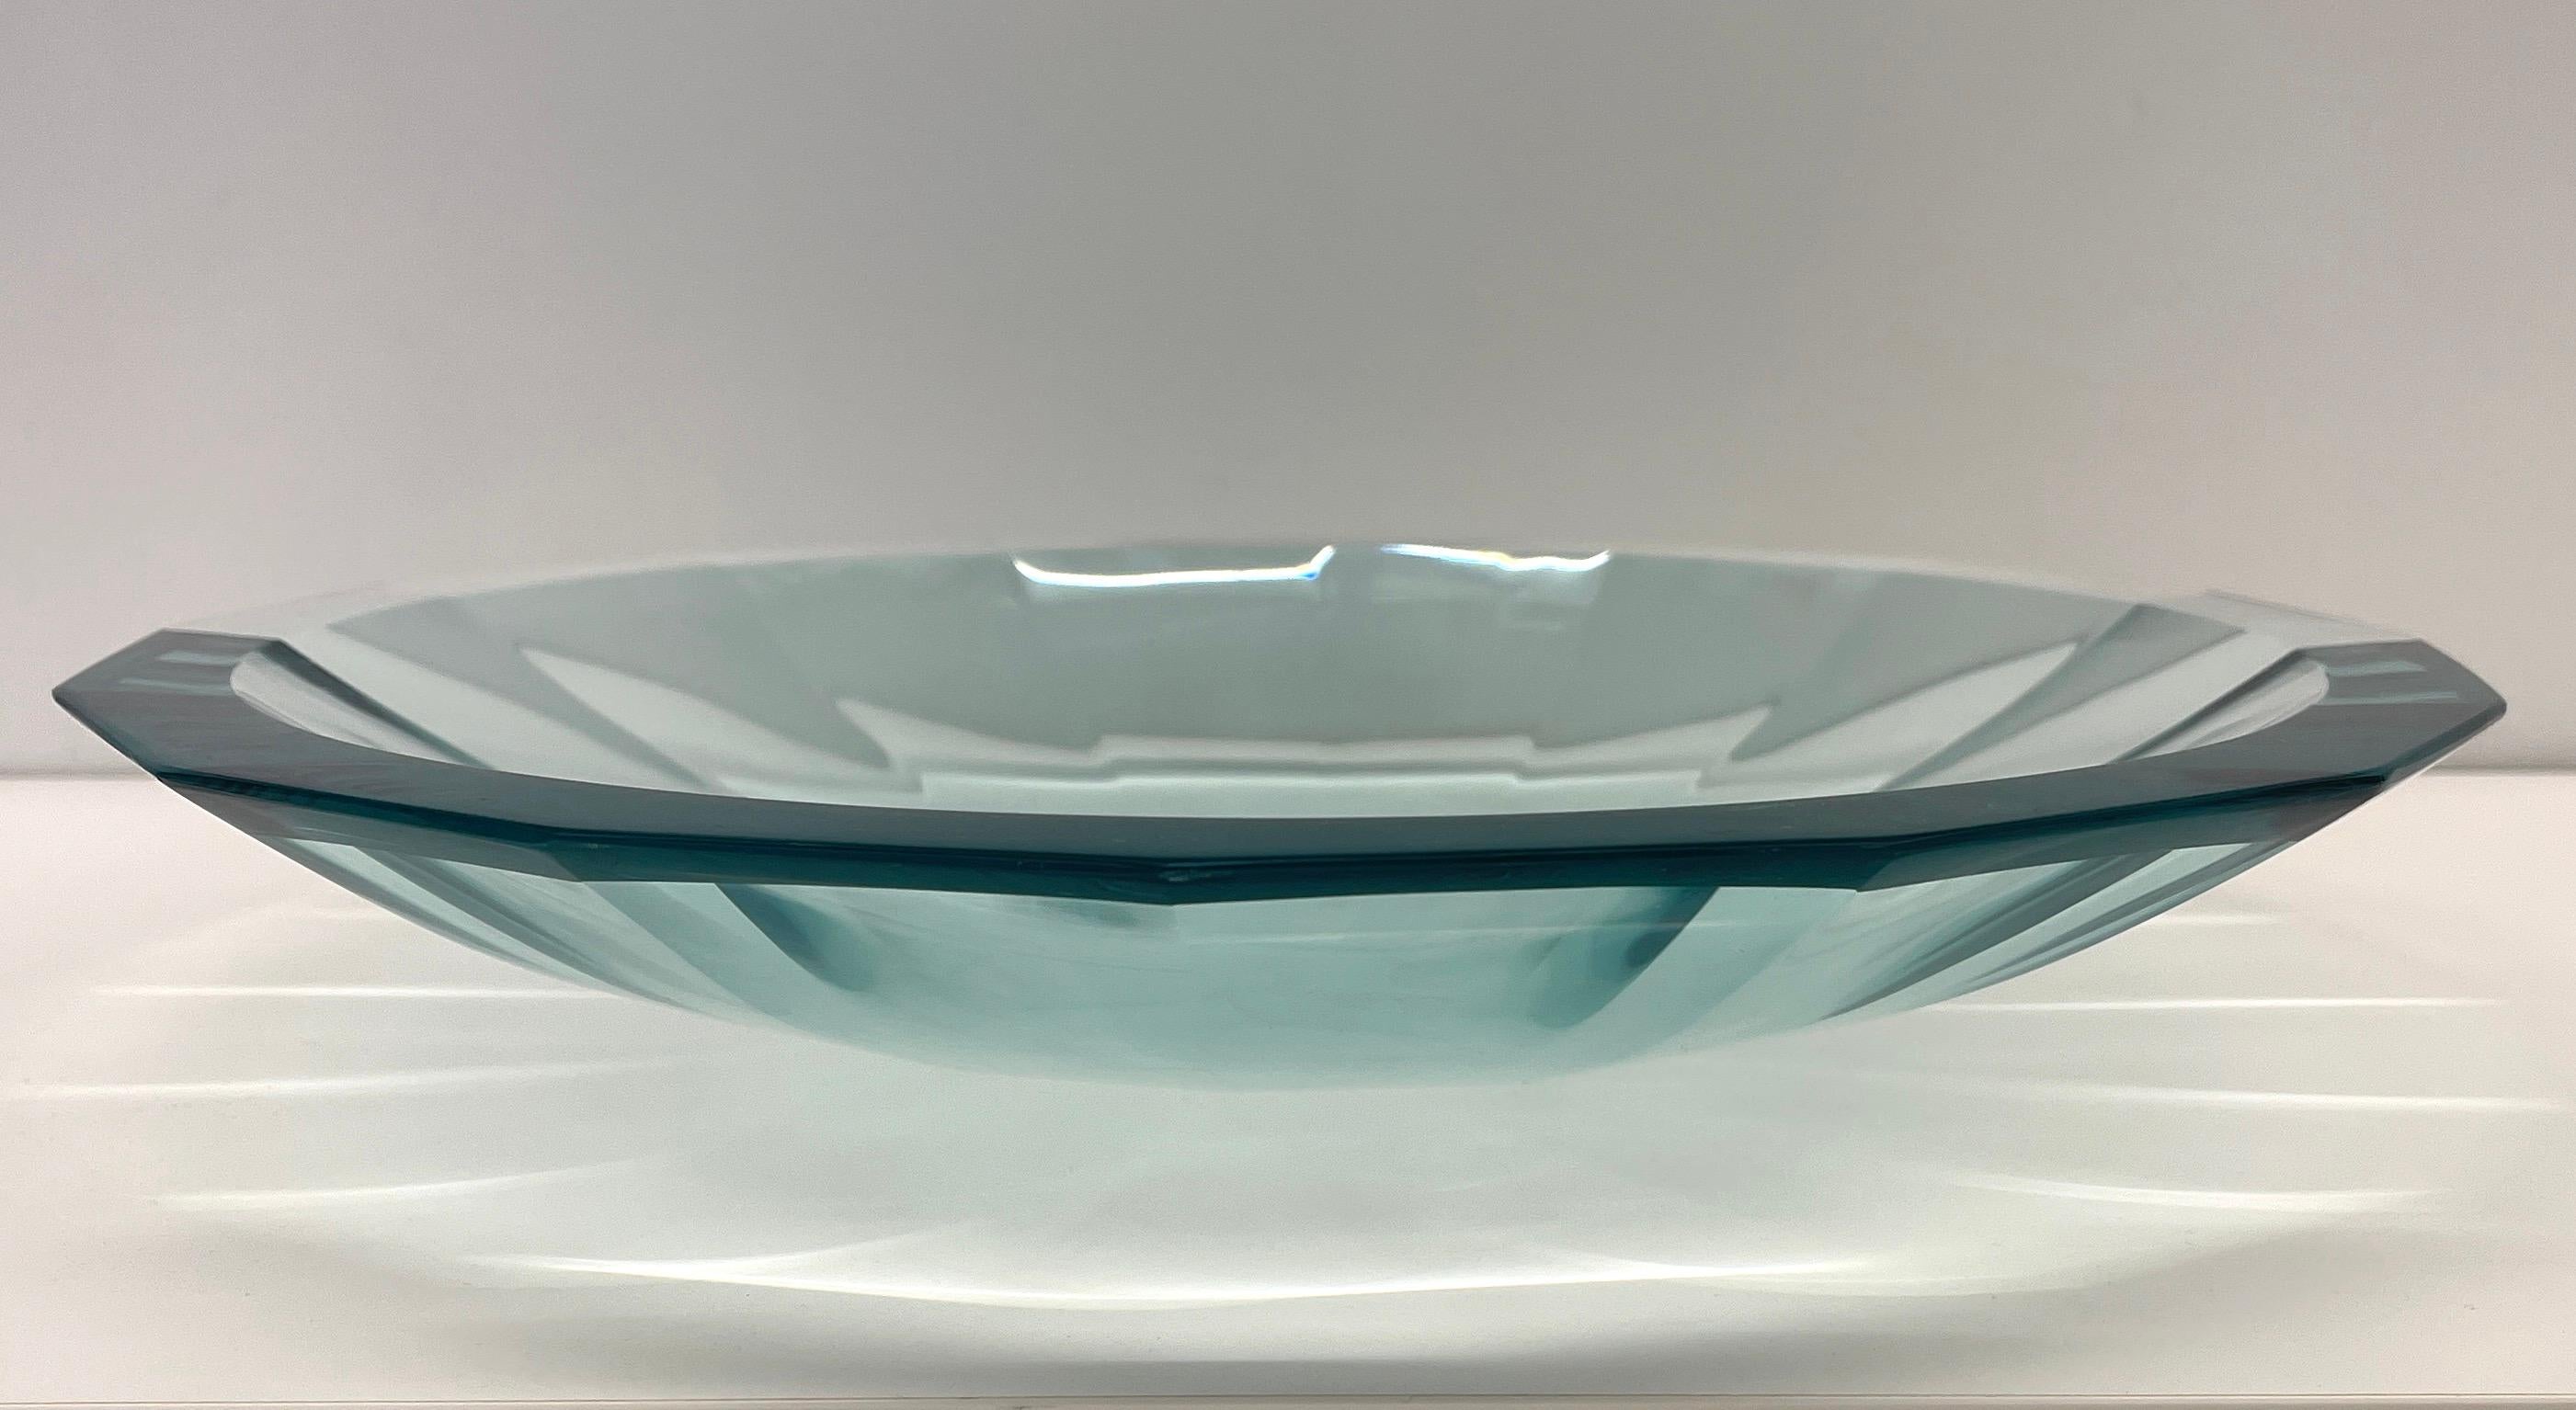 This object is a handmade artistic sculpture that can be used as a bowl, as a centerpiece or simply as it is to furnish any environment.
This crystal has a high transparency aquamarine green color.
The surface is smooth and shiny and has been worked